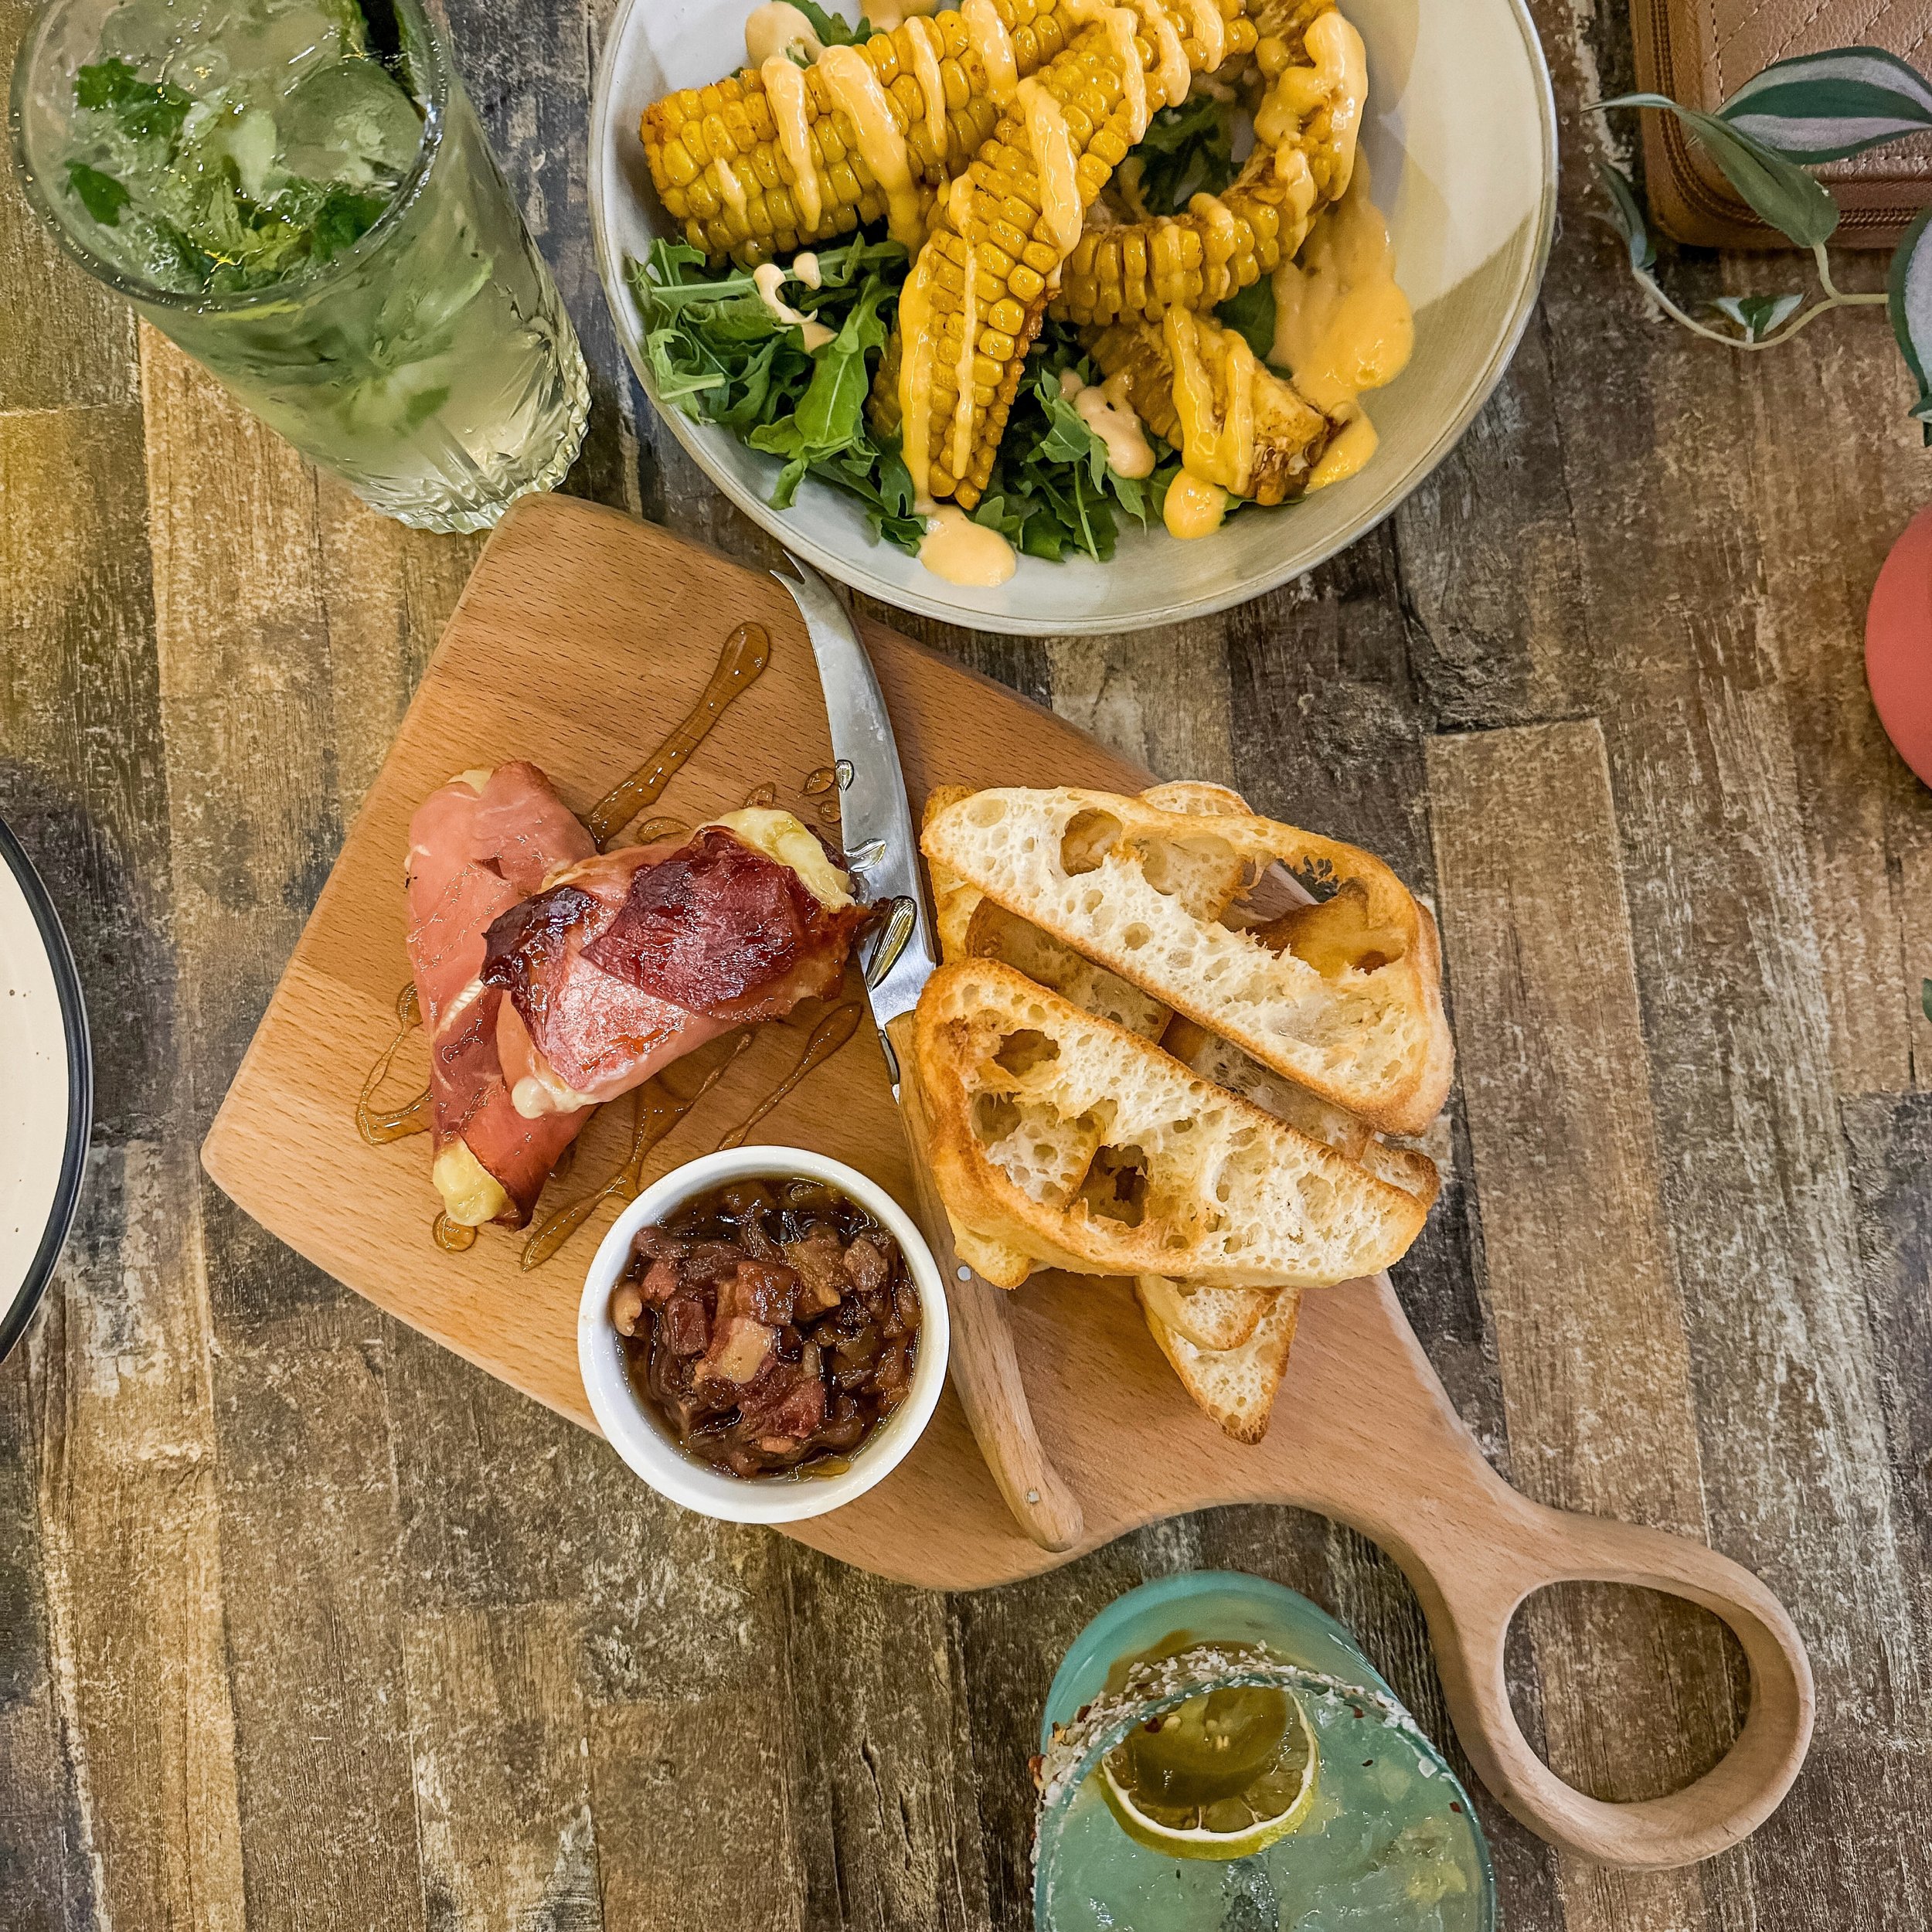 Sundays are for a spread of delicious bites and a couple of cheeky cocktails on the deck 👏🏼🍸🧀🌽 Featuring our Prosciutto wrapped Baked Brie and Corn Ribs - both featured on our dinner menu available 5-9pm 🤤